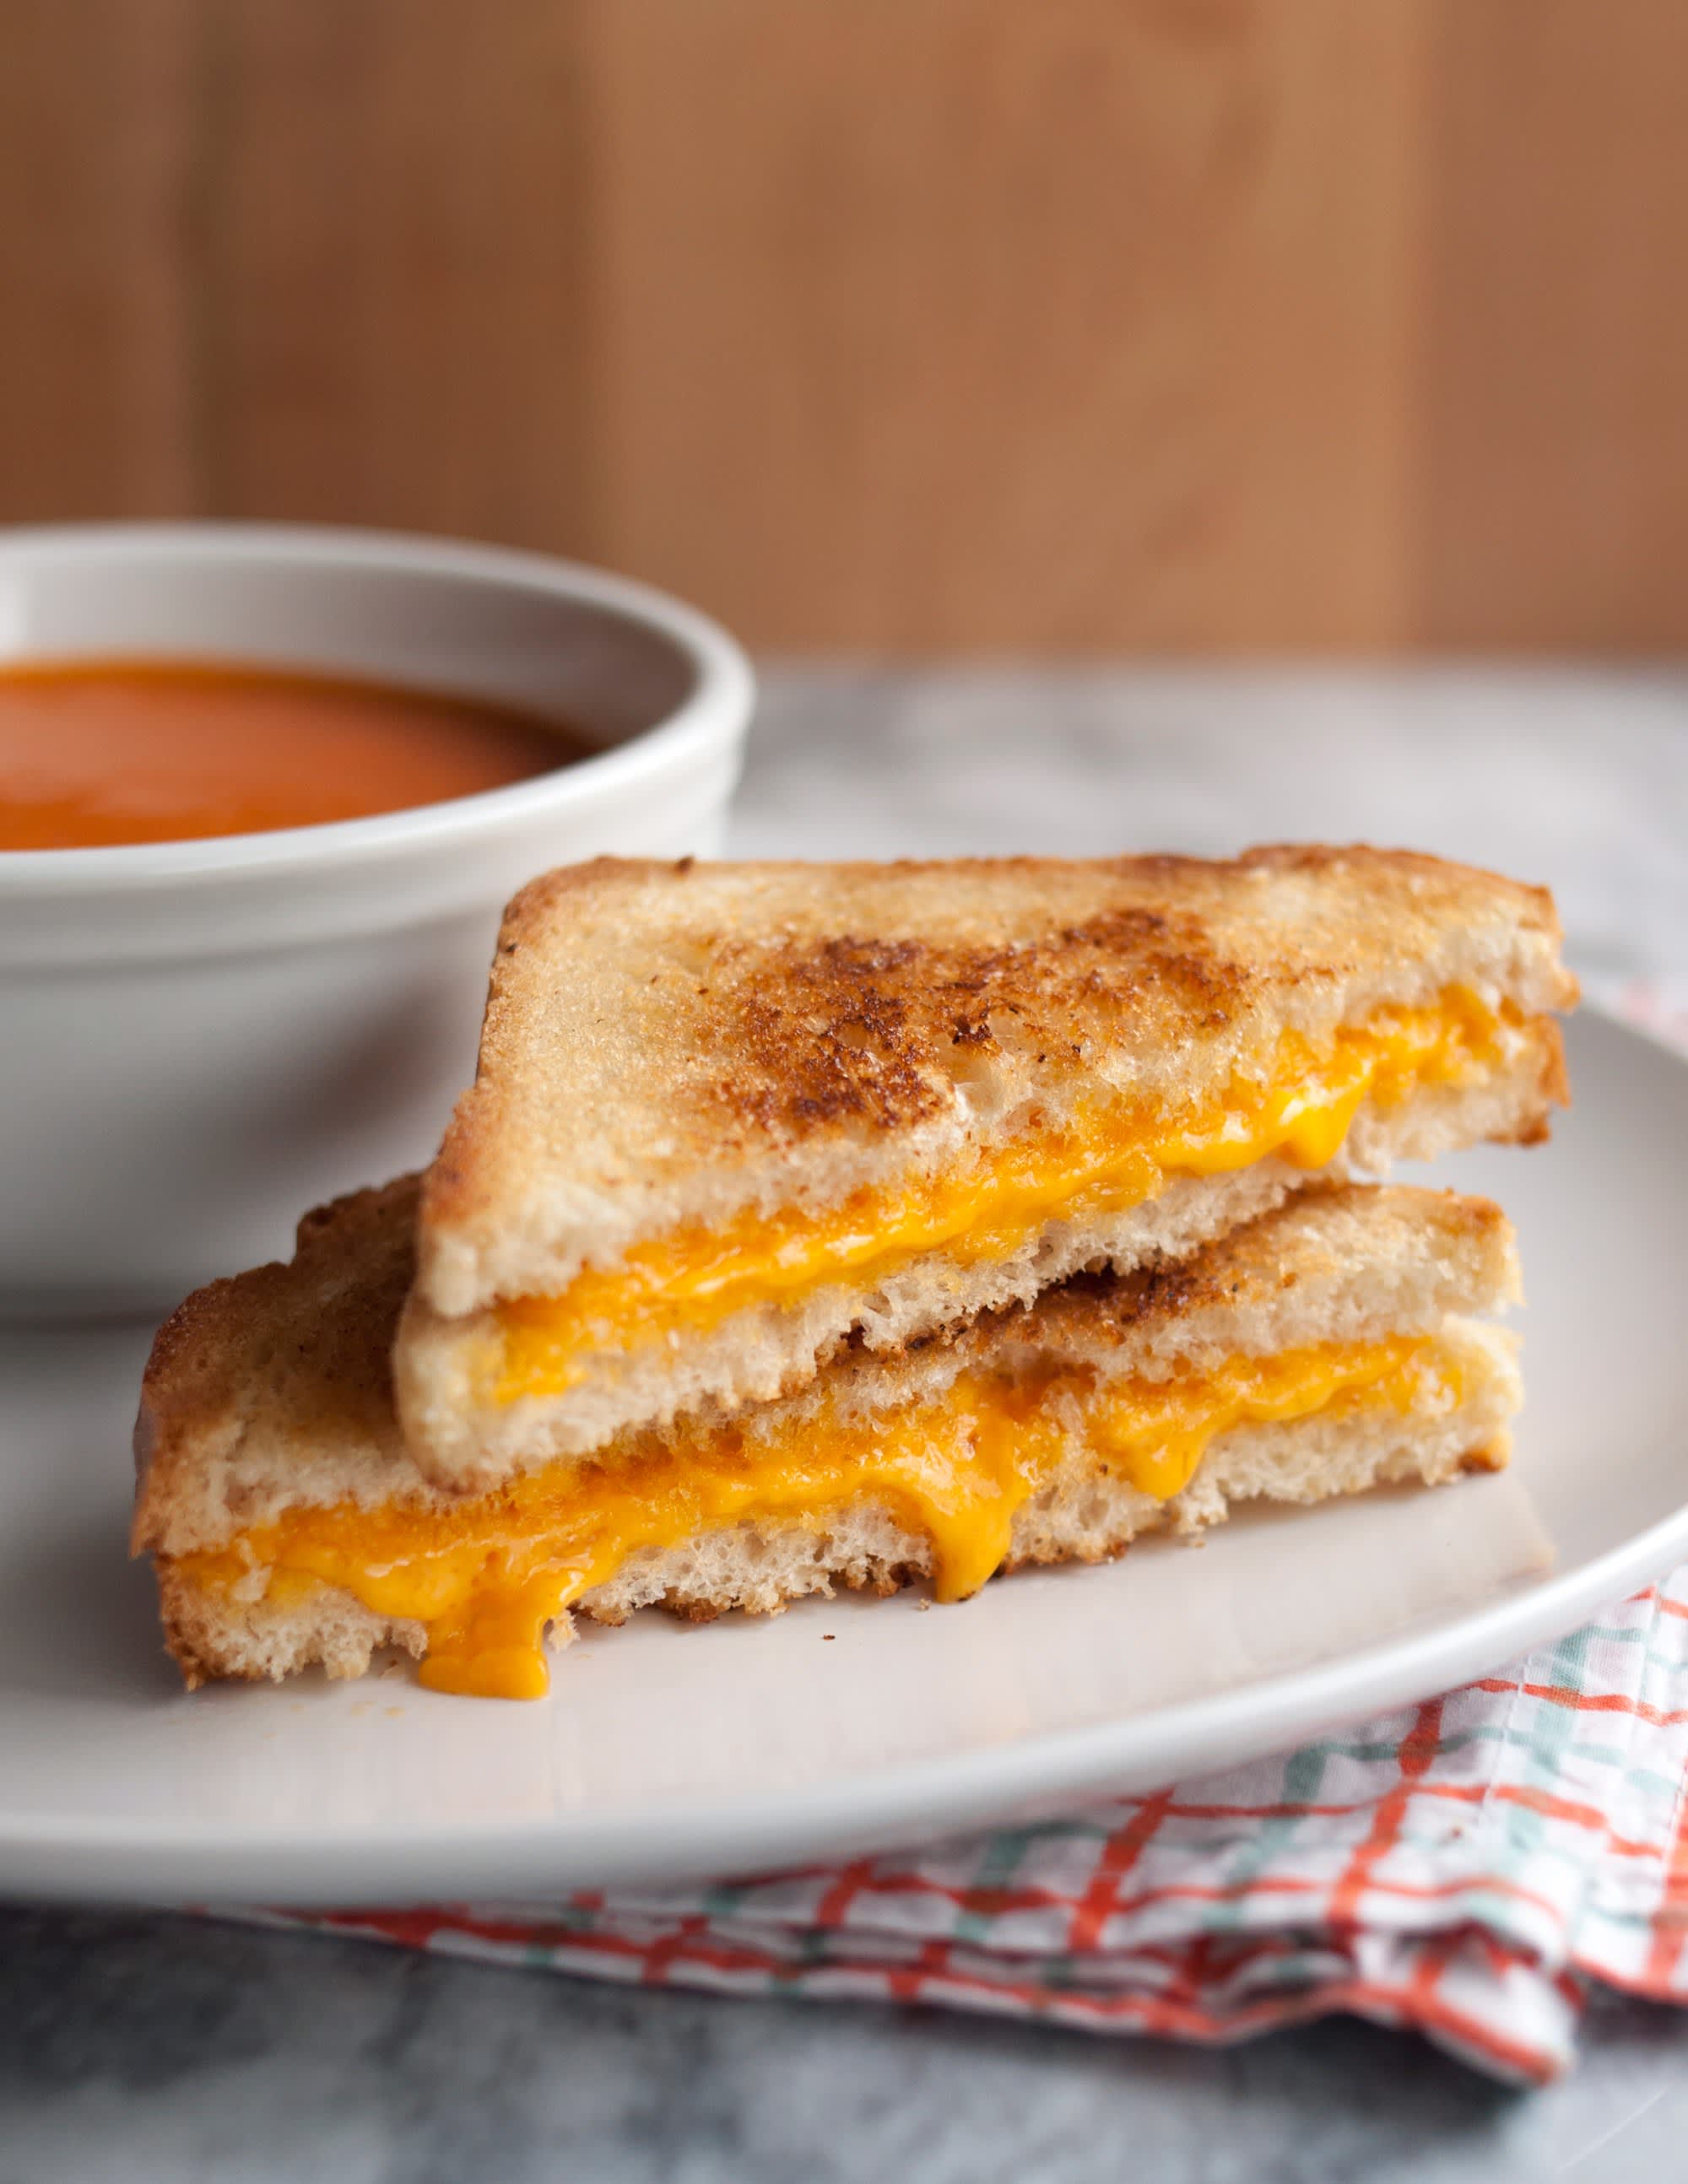 Toaster Oven Grilled Cheese Sandwich - The Short Order Cook